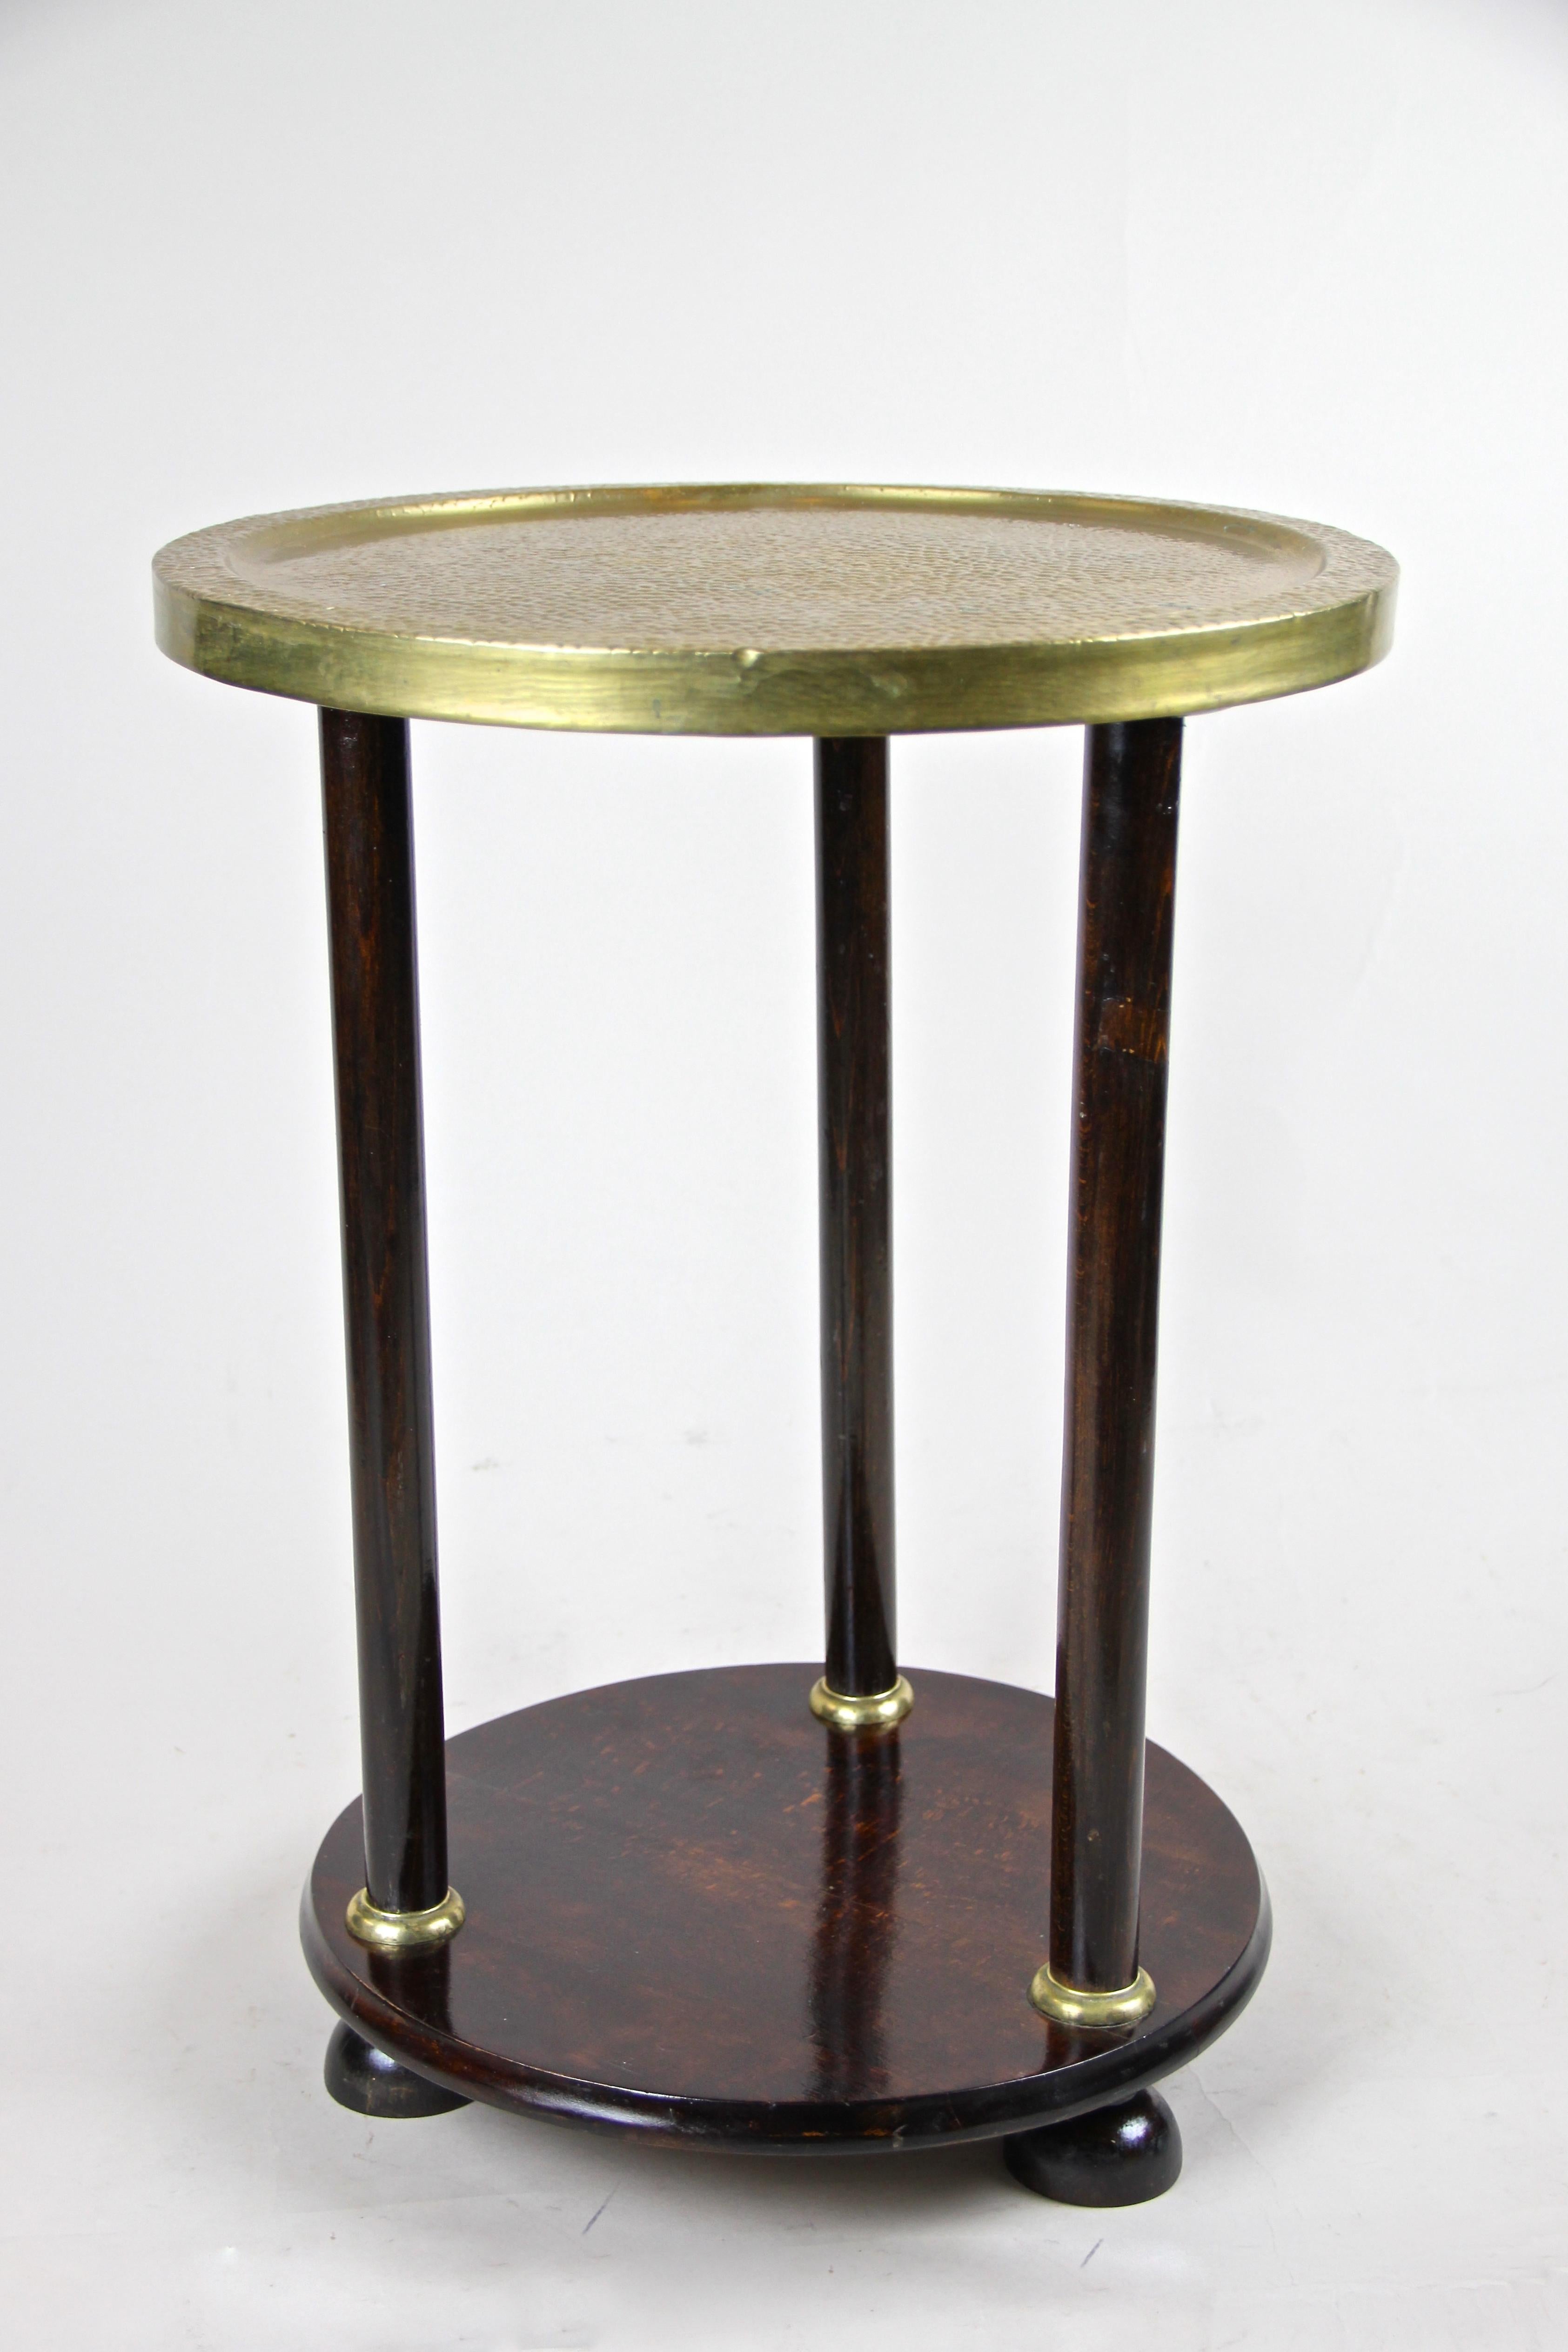 20th Century Gueridon Side Table with Brass Table Top Attributed to Kohn, Austria, circa 1910